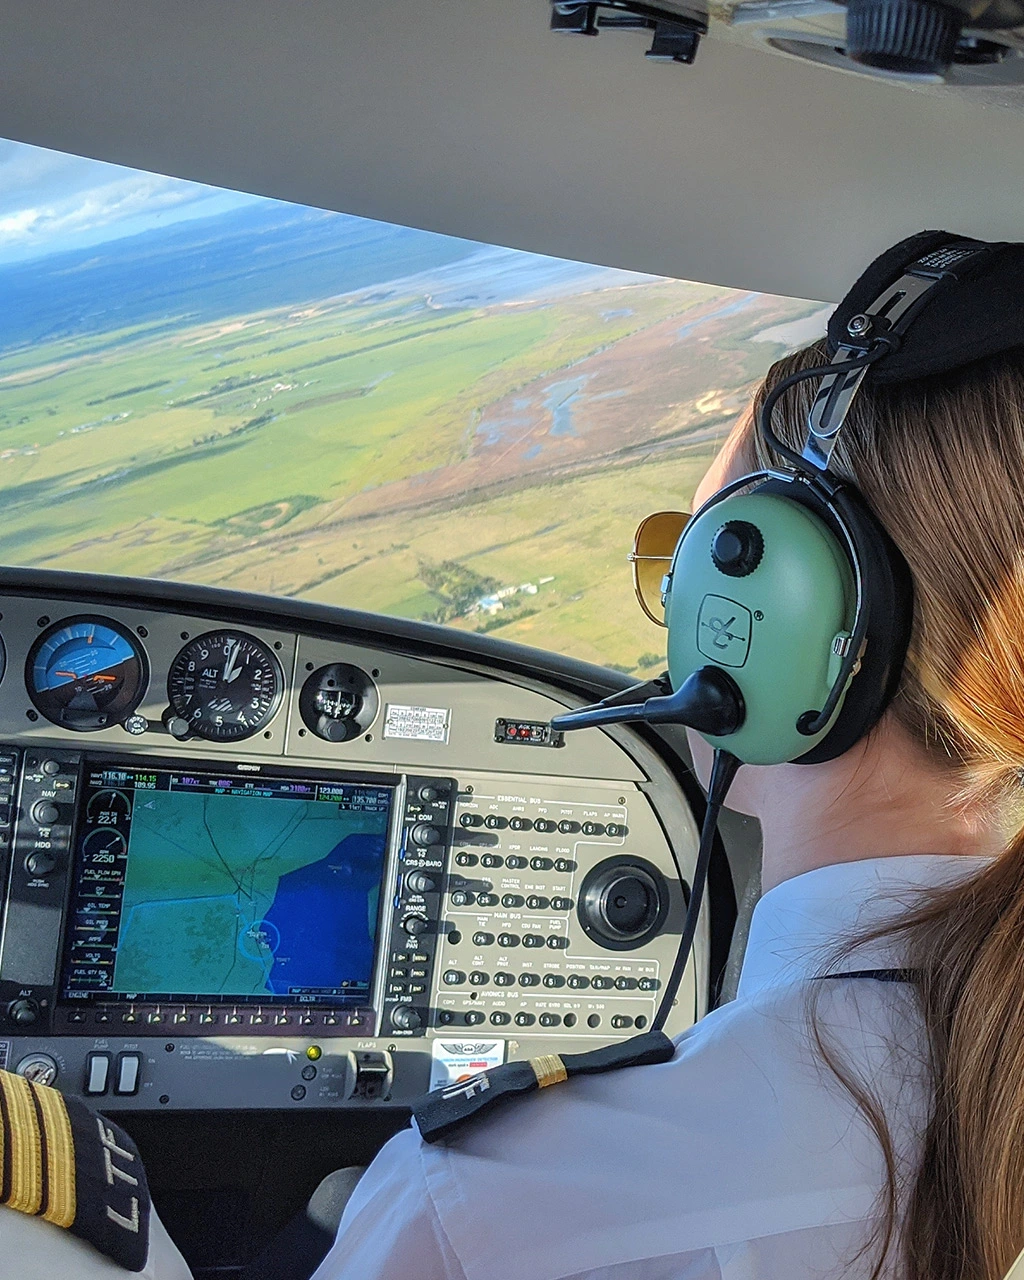 Common Pilot Phrases: What Are The Pilot Phrases You Should Know?